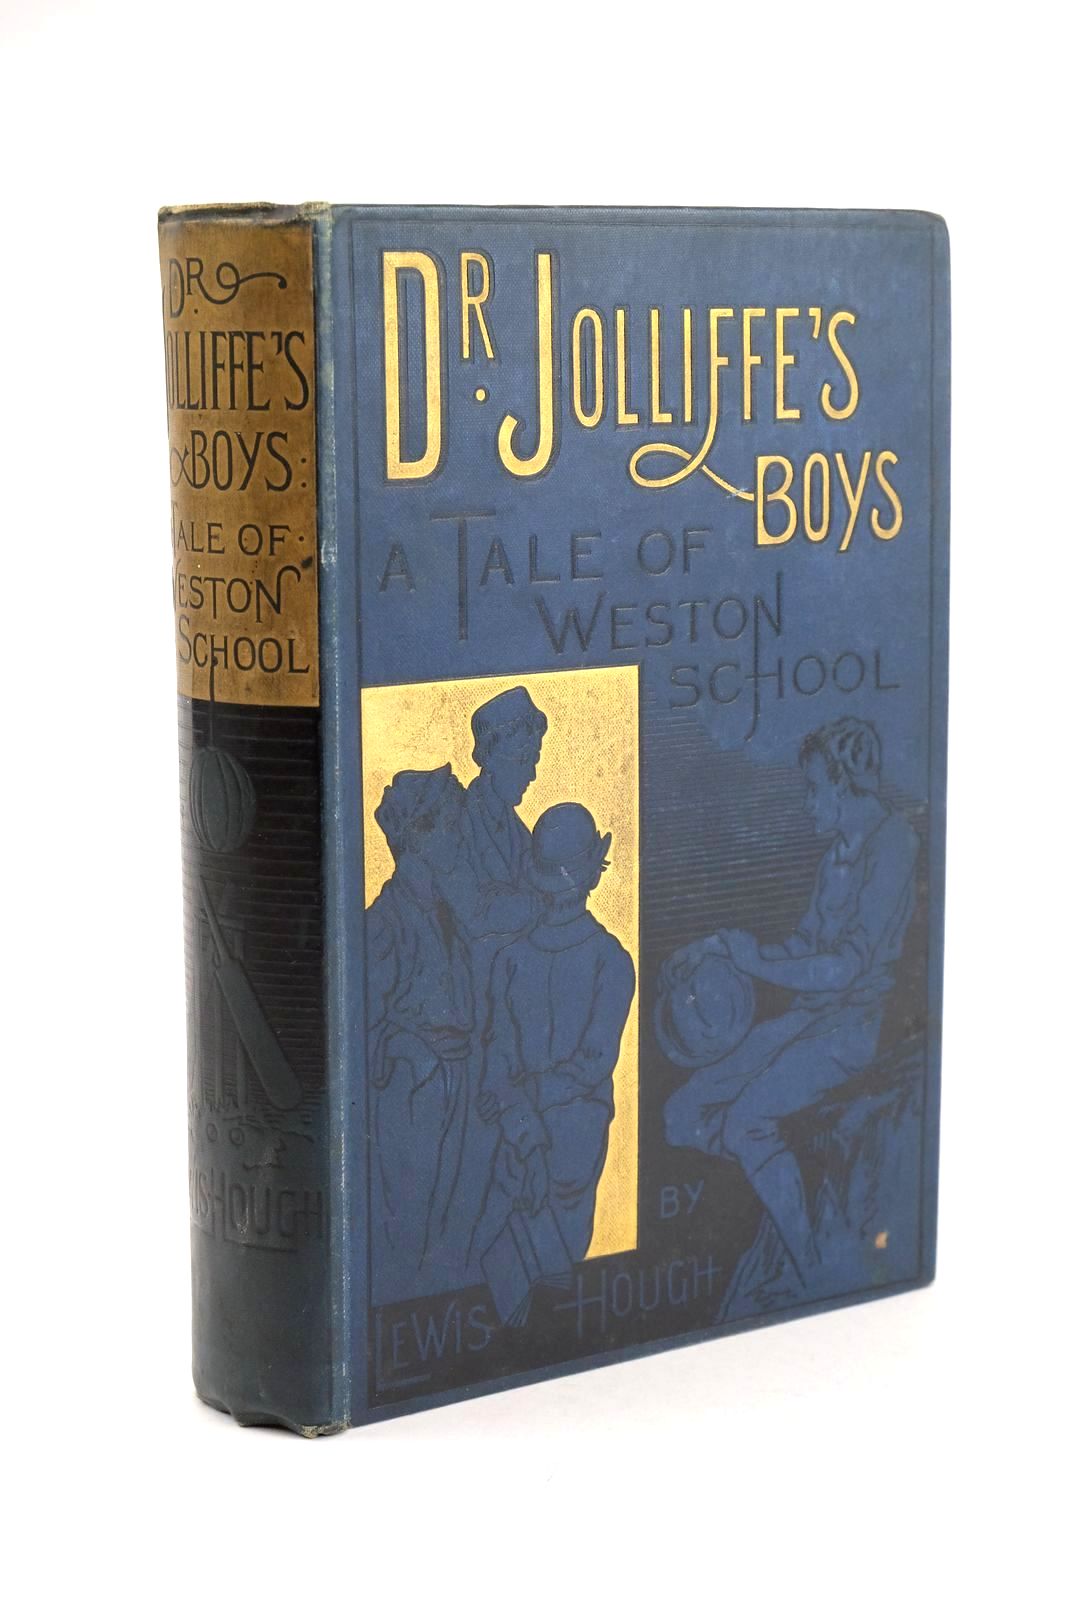 Photo of DR. JOLLIFFE'S BOYS:  A TALE OF WESTON SCHOOL written by Hough, Lewis illustrated by Feller, Frank published by Blackie & Son Ltd. (STOCK CODE: 1324658)  for sale by Stella & Rose's Books